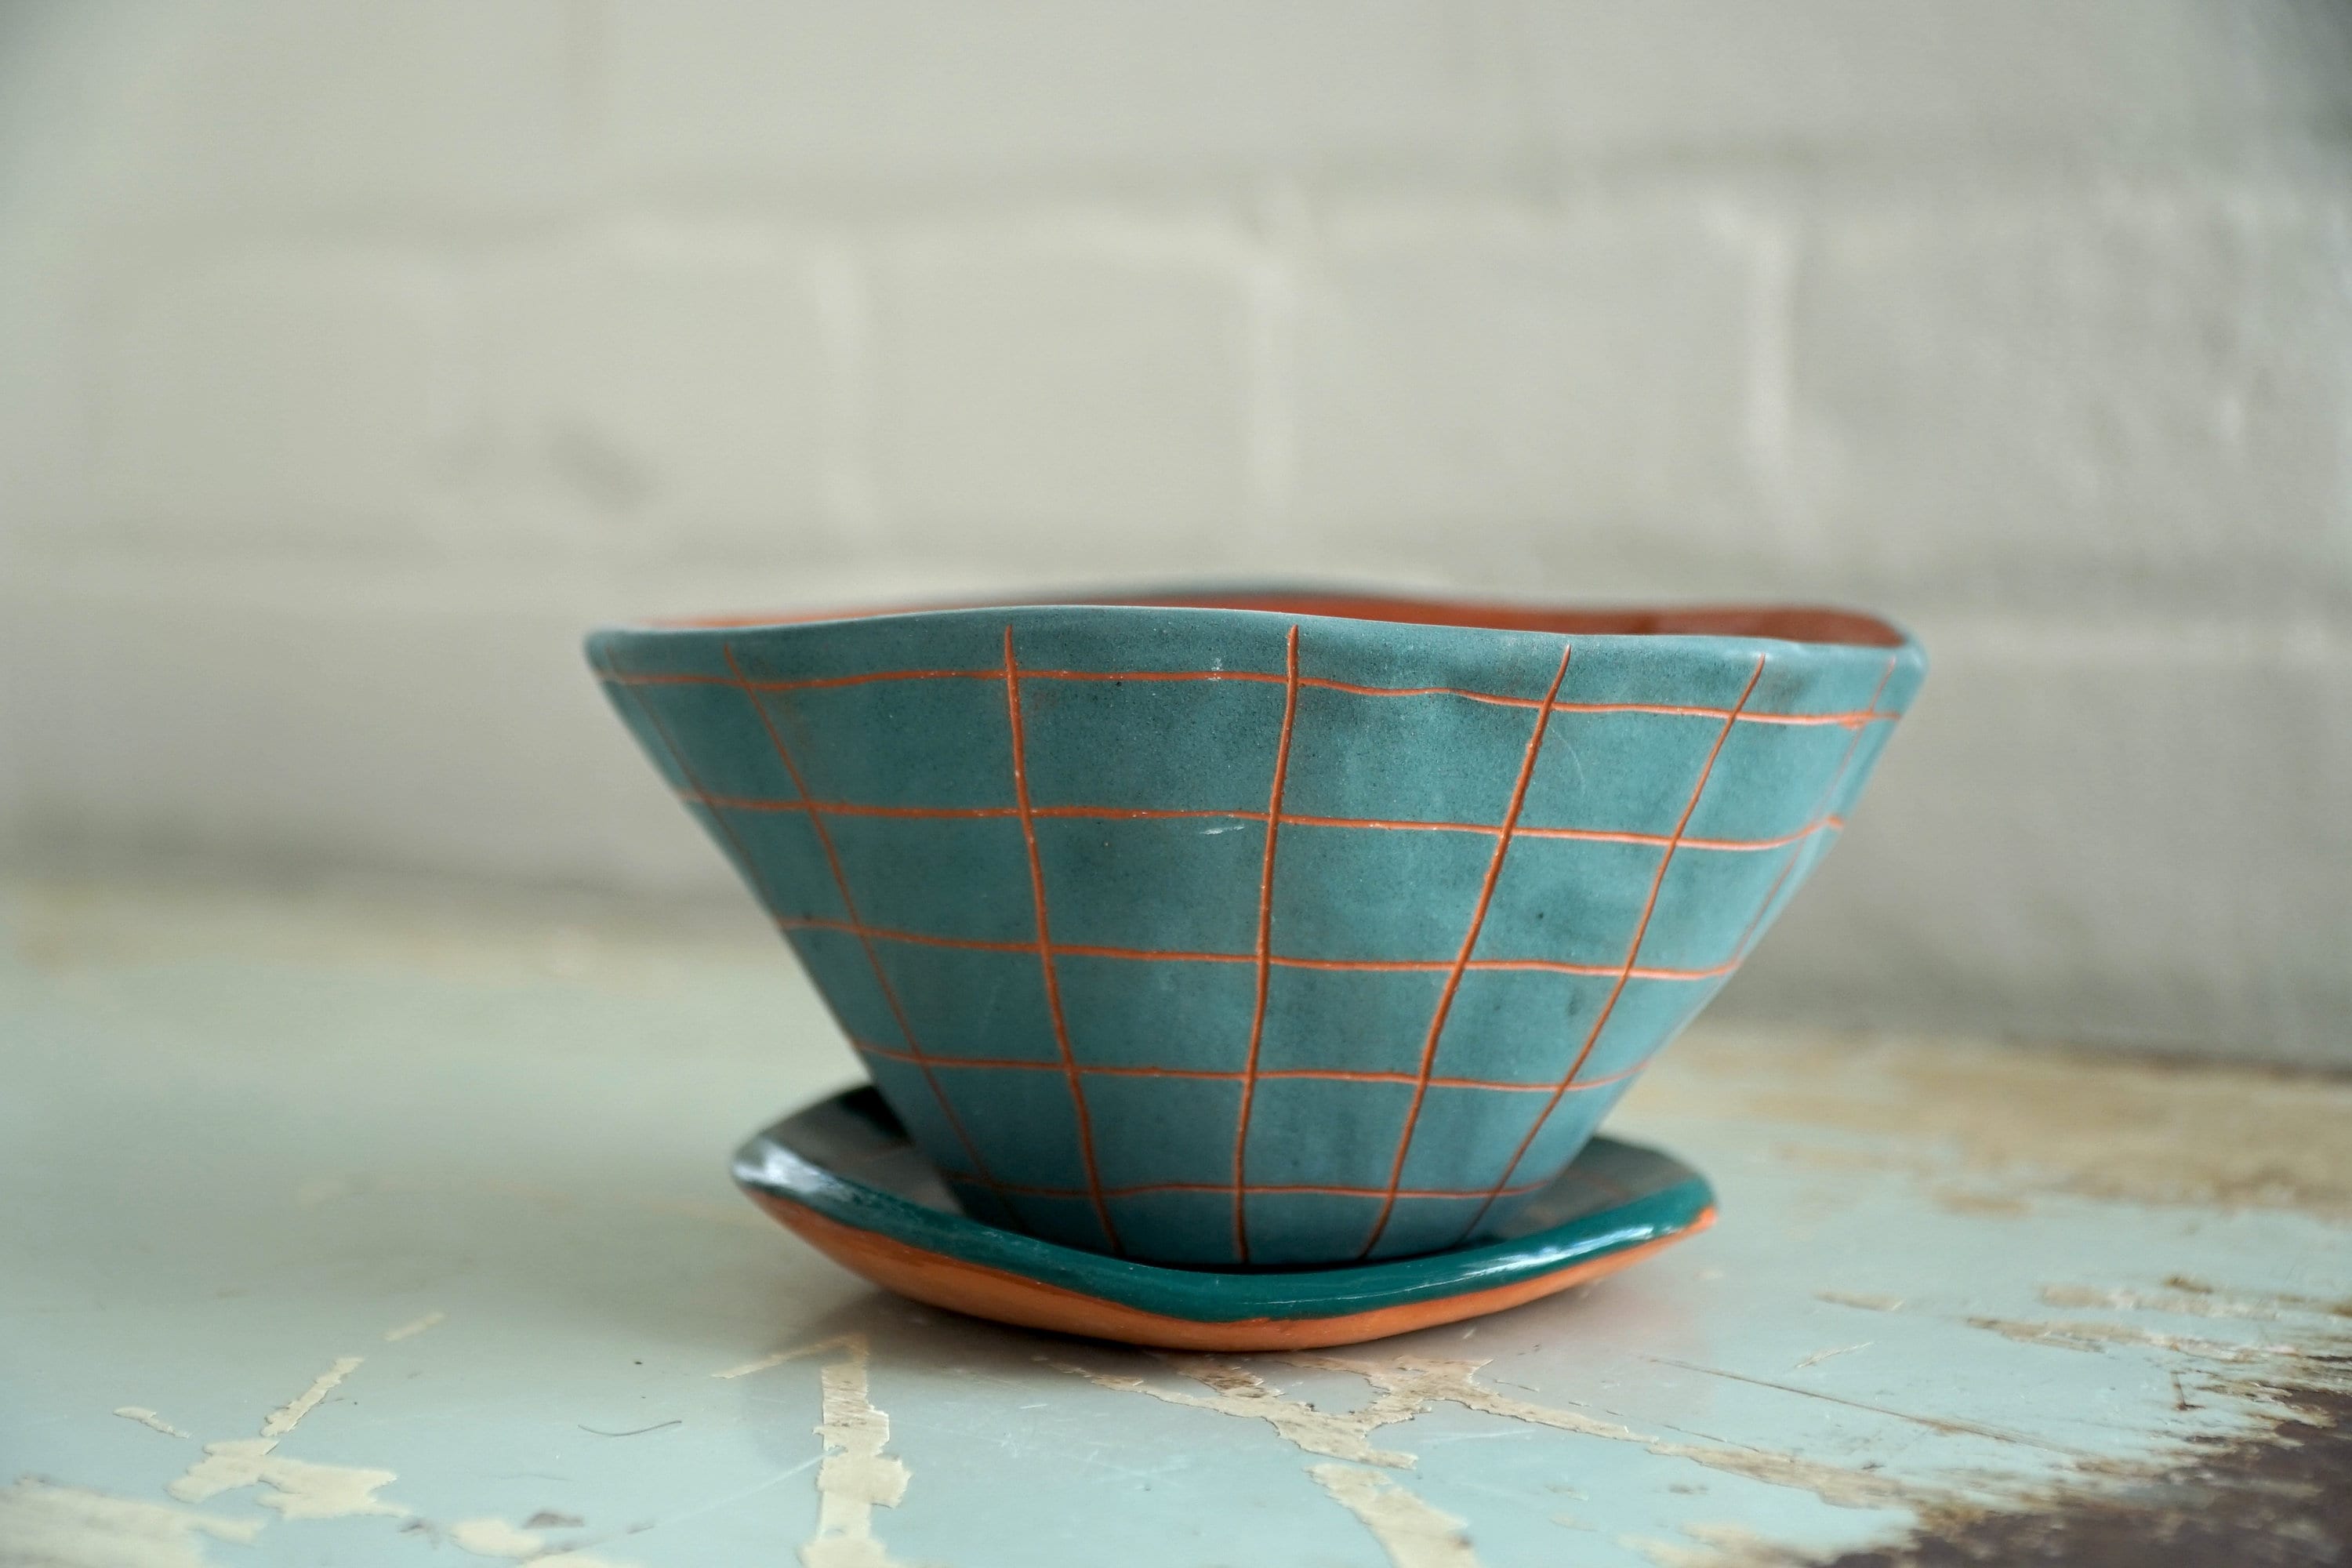 Teal and Terracotta Table Planter w/ "Grid" Design - Matching Tray - Succulent Planter - Small Plant Pot - Propagating Planter - Housewarming